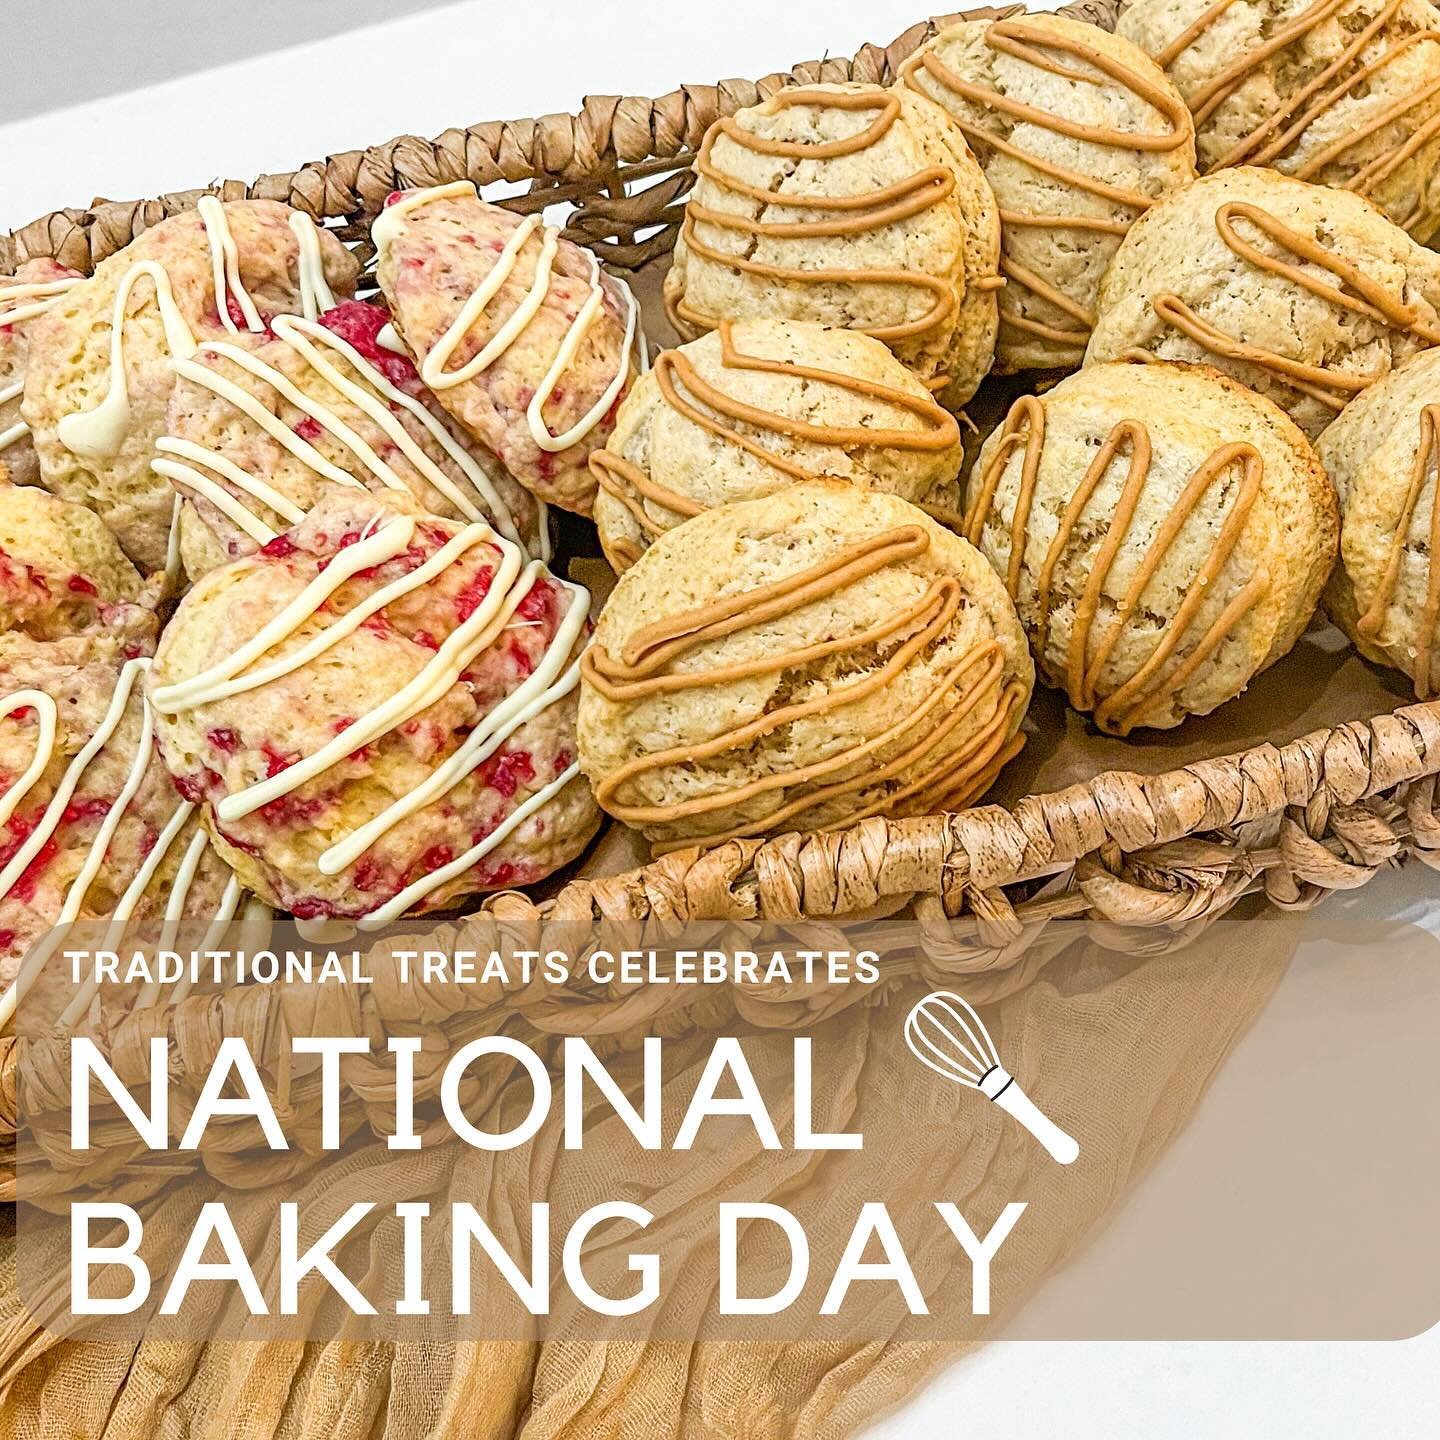 NATIONAL BAKING DAY! 
.
Today Traditional Treats celebrate national baking day. Baking is not only my business but a huge part of my life. It brings me so much joy knowing I am able to make these amazing treats and create new ones from scratch.